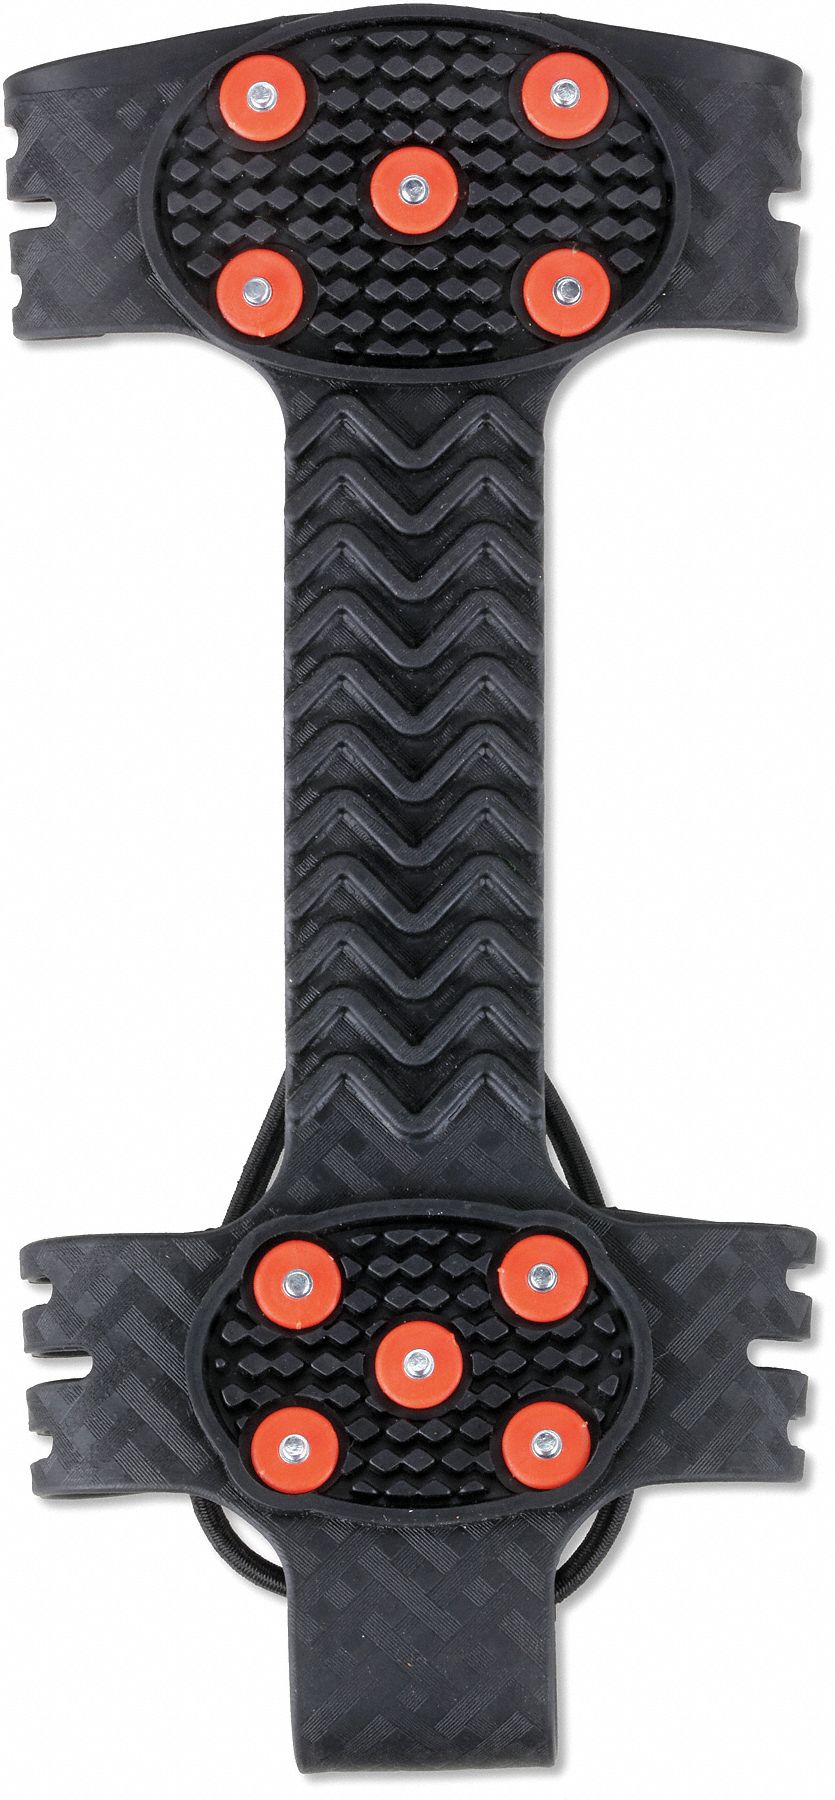 Traction Device: Ball/Heel Footwear Coverage, Rubber, Stud, Pull-On Traction Attachment, Black, 1 PR